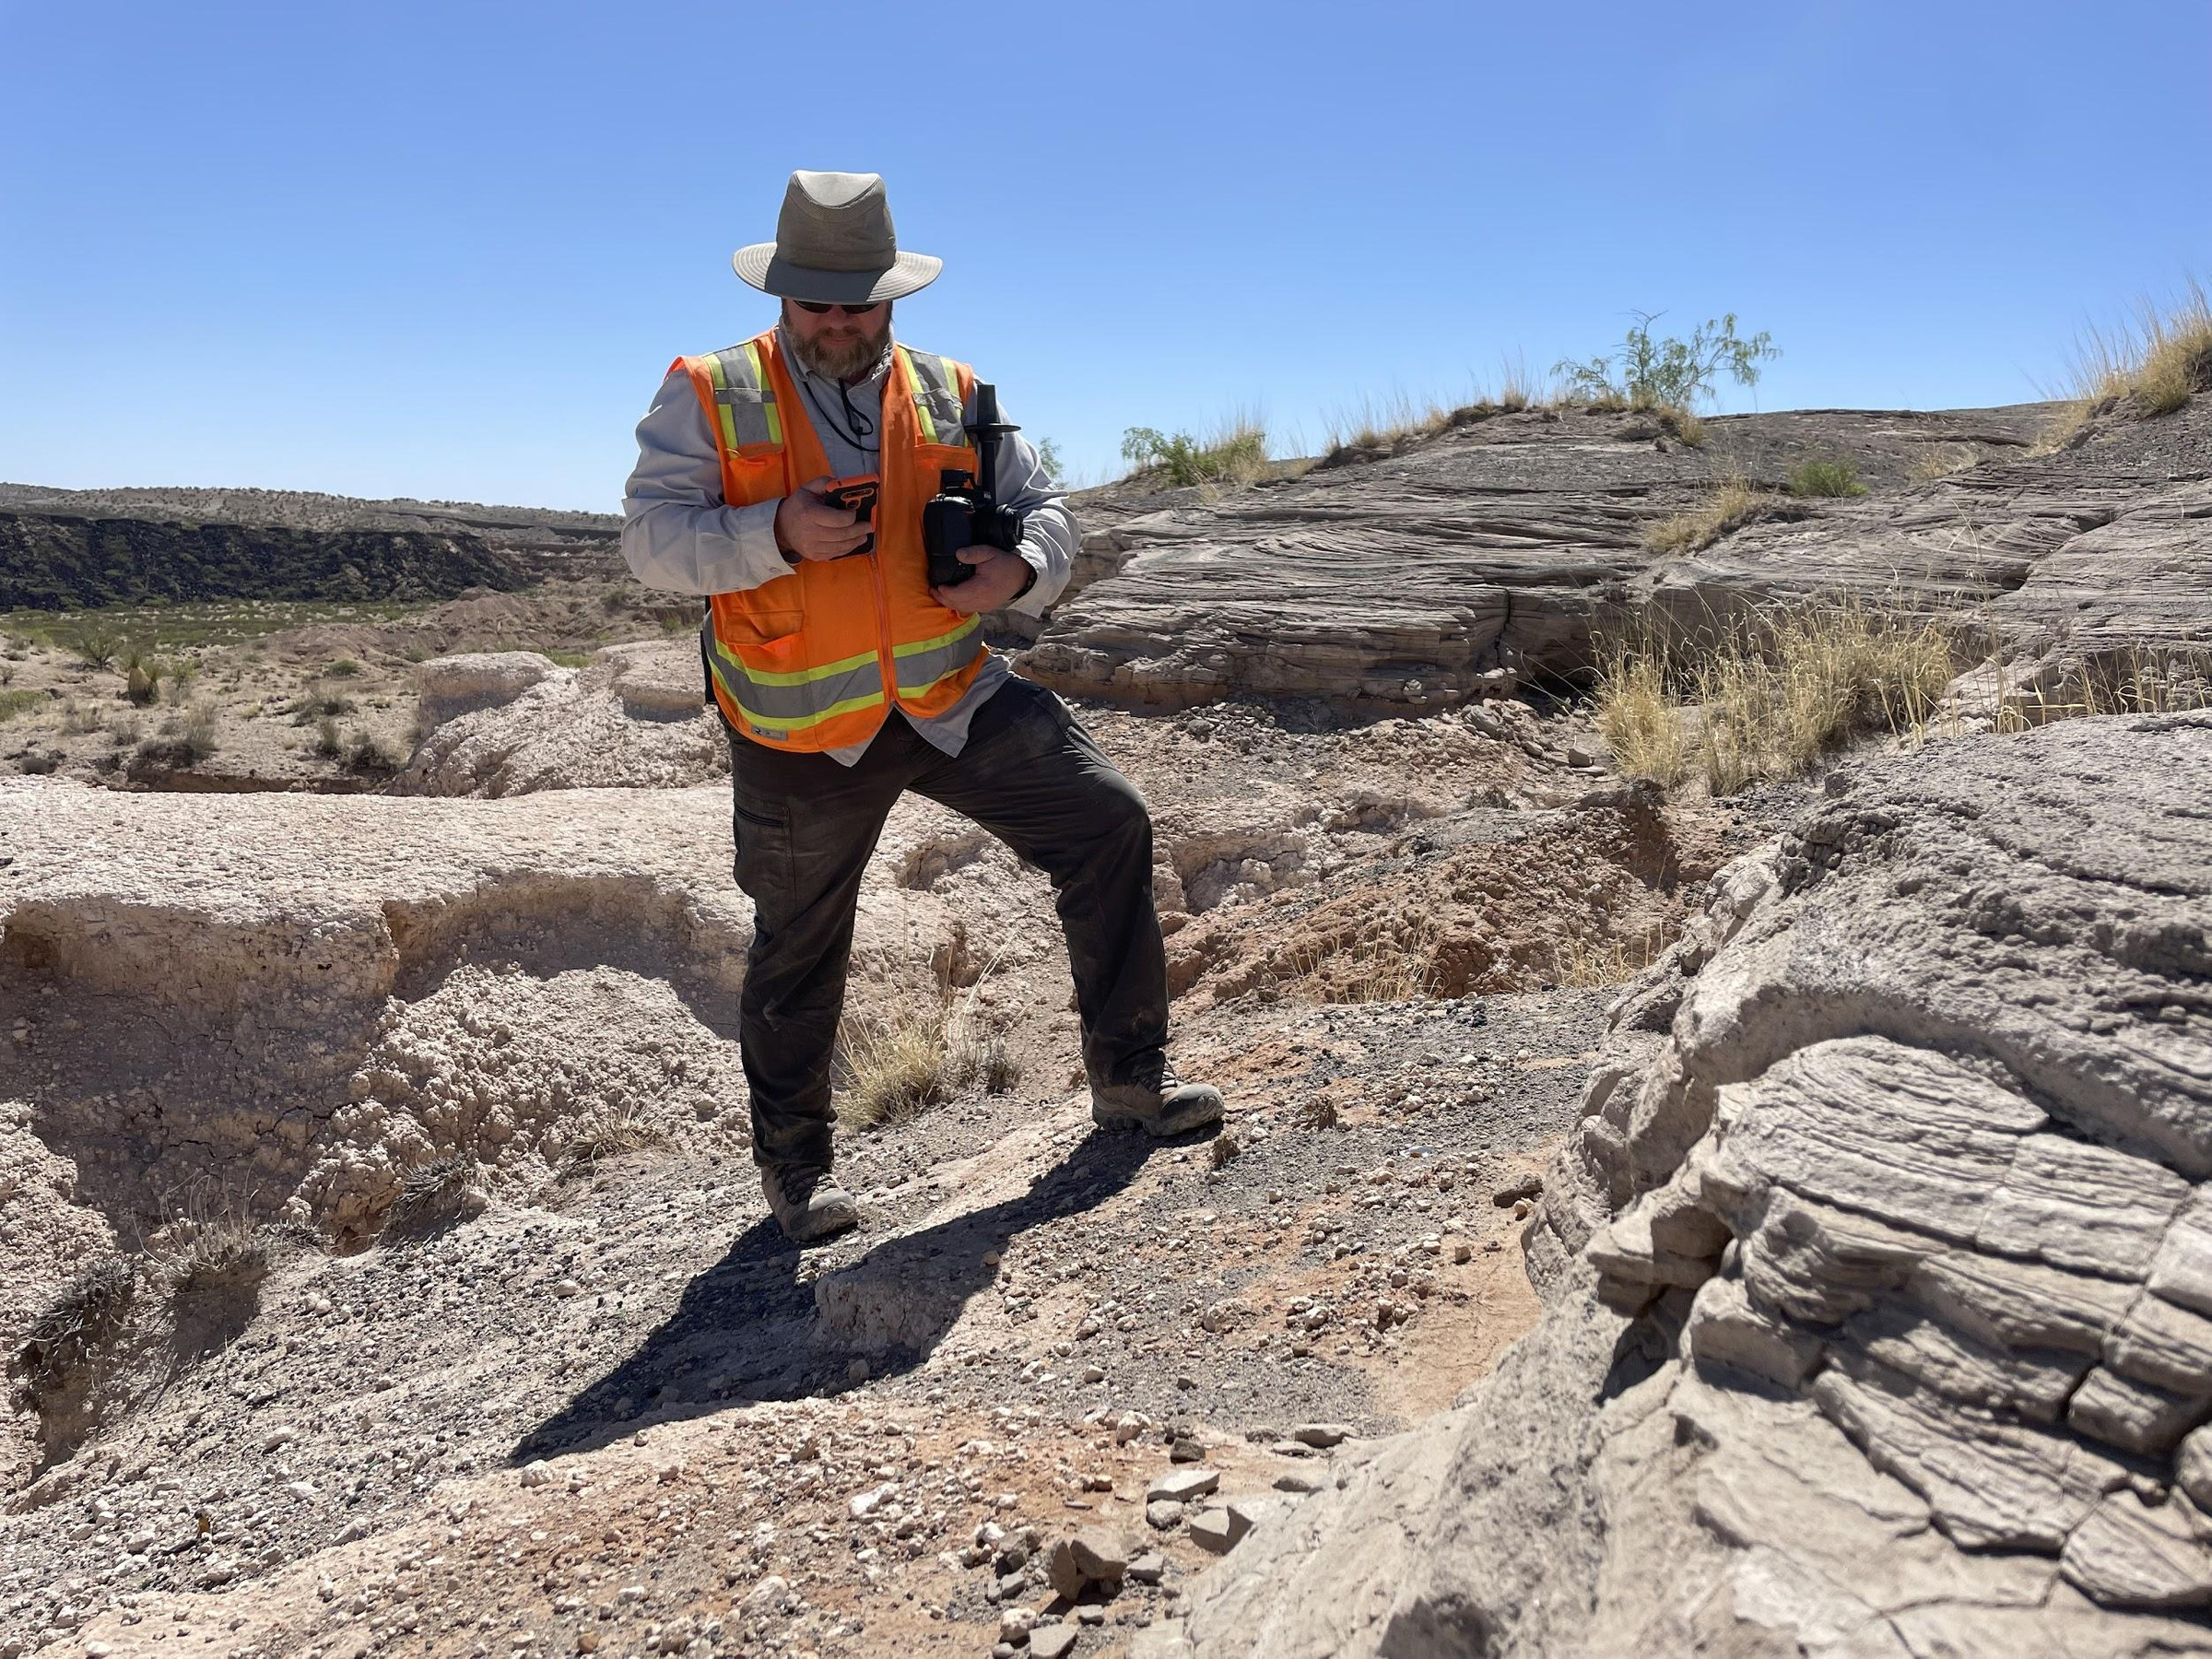 Stephen Scheidt on location at Potrillo Volcanic Filed in New Mexico, April 2022